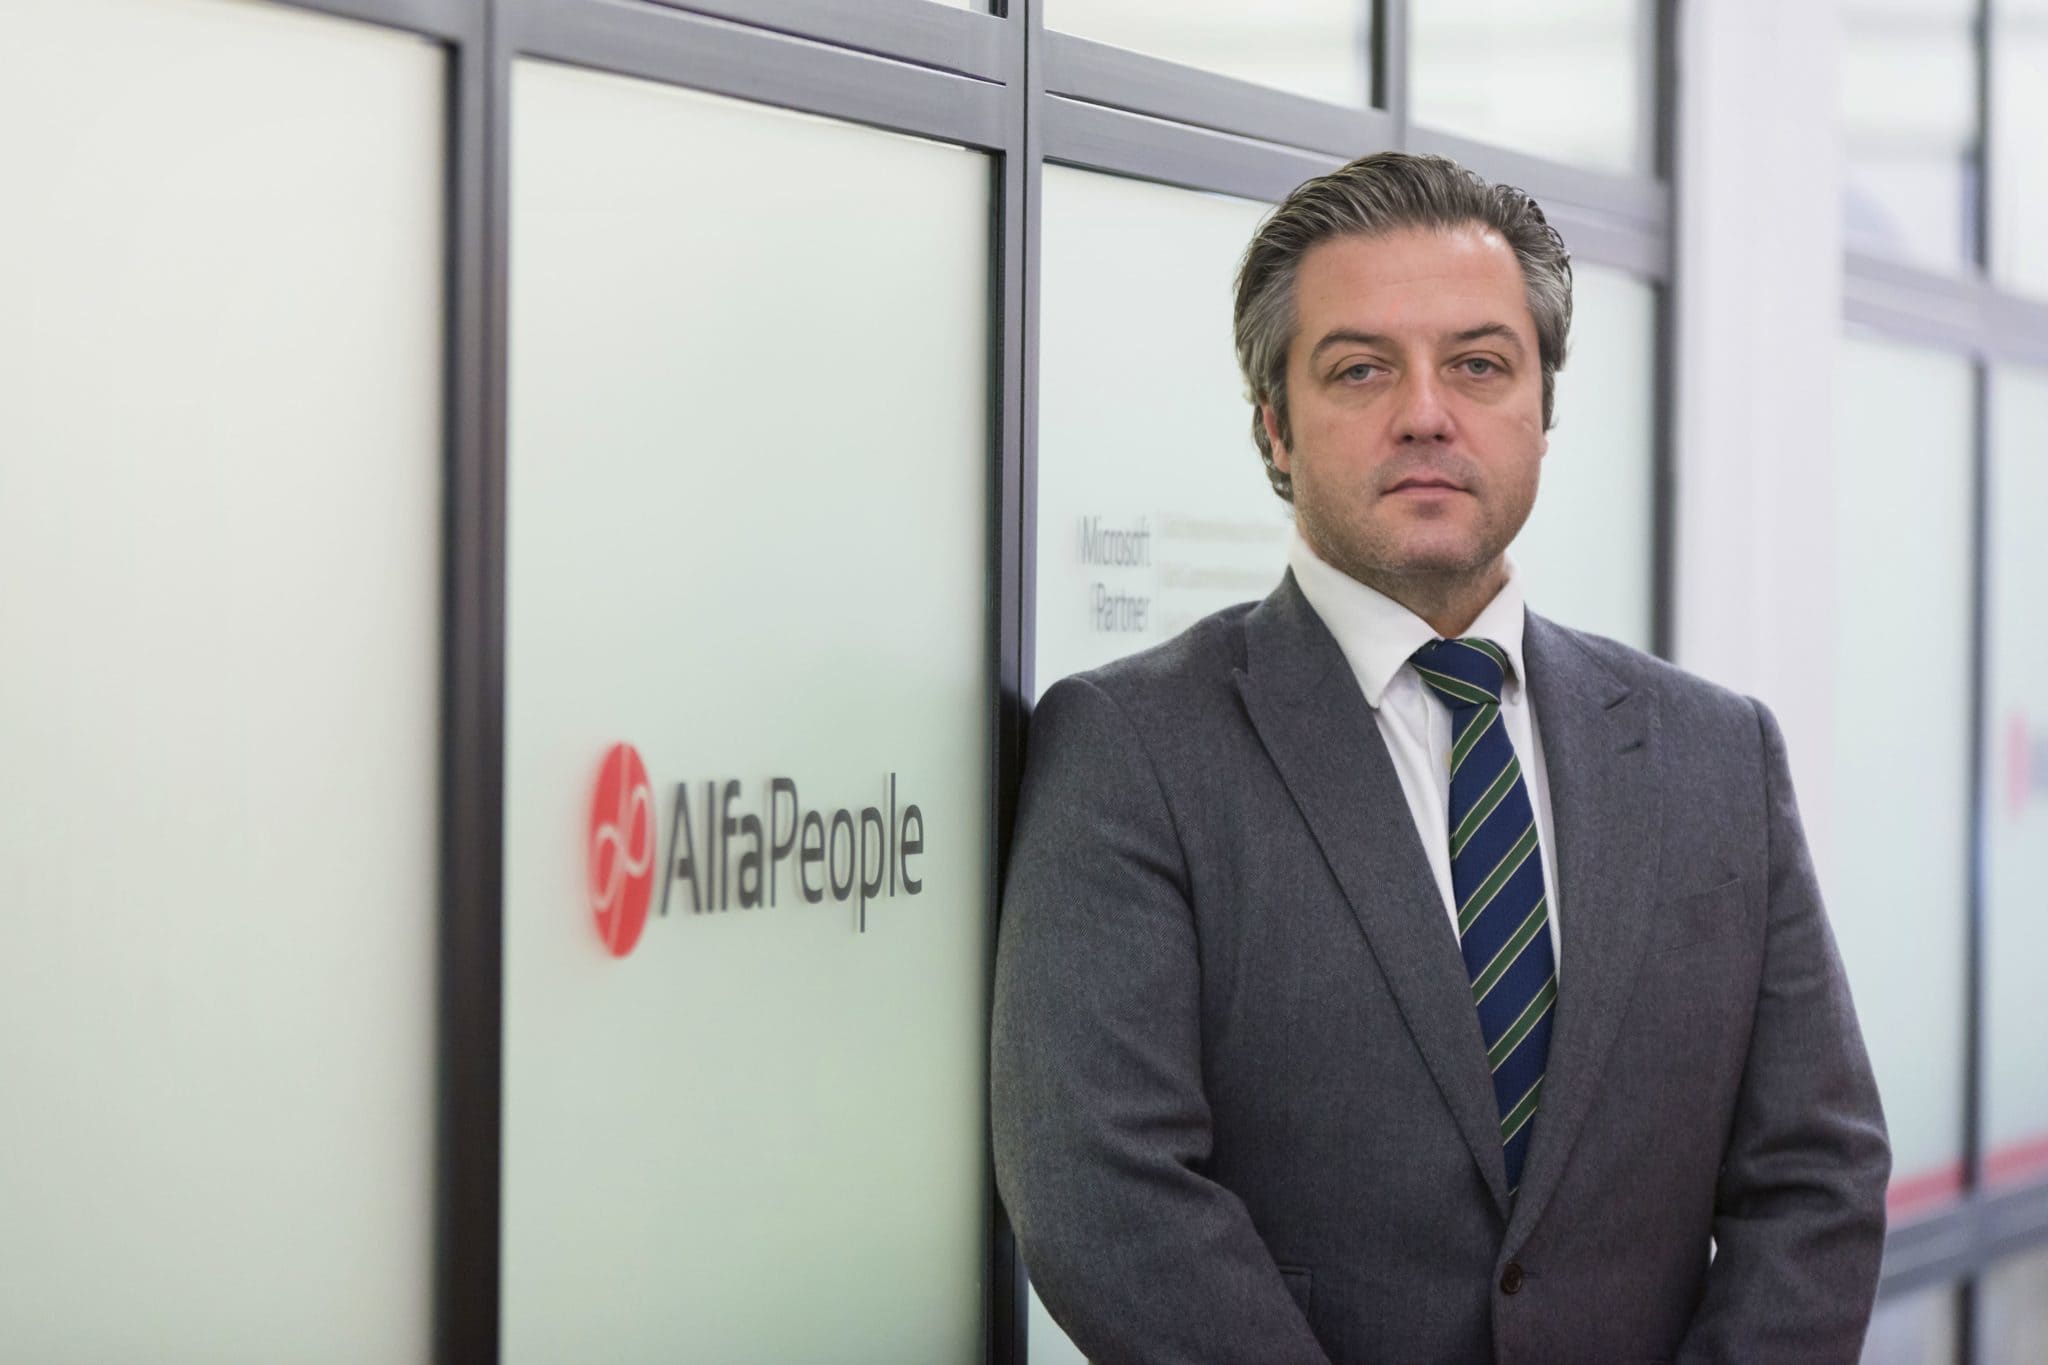 Former Microsoft UK leader takes the helm at AlfaPeople UK